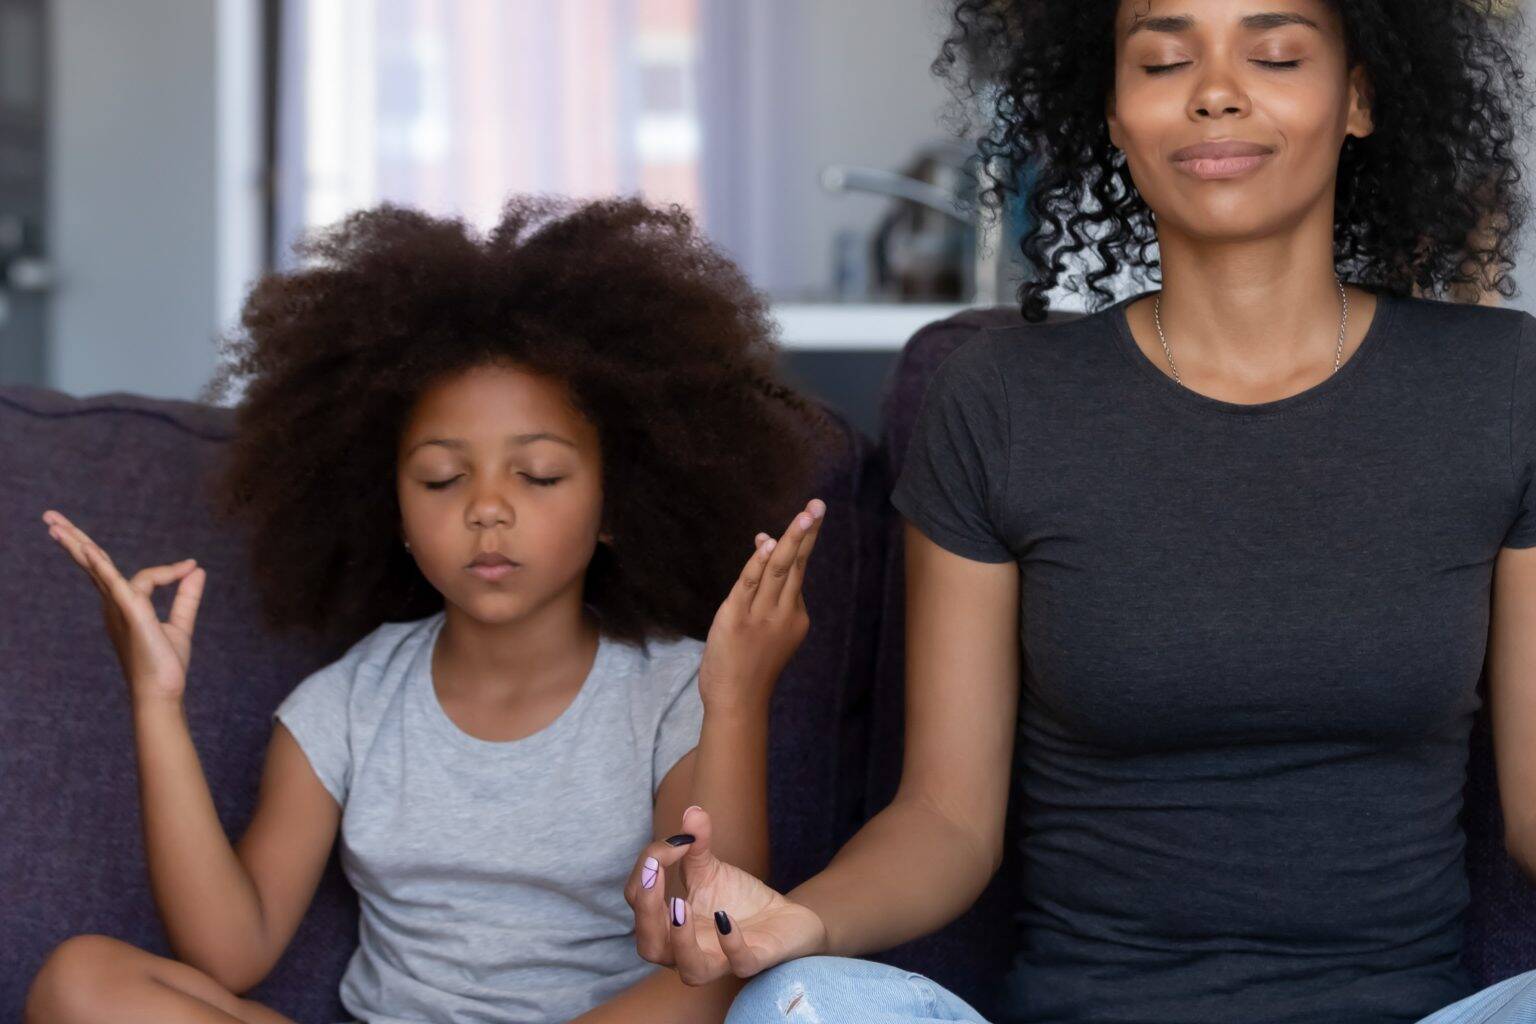 Cardiovascular Health - Mother and daughter meditating together on a couch, embodying a serene approach to lowering stress and managing blood pressure naturally with meditation techniques.